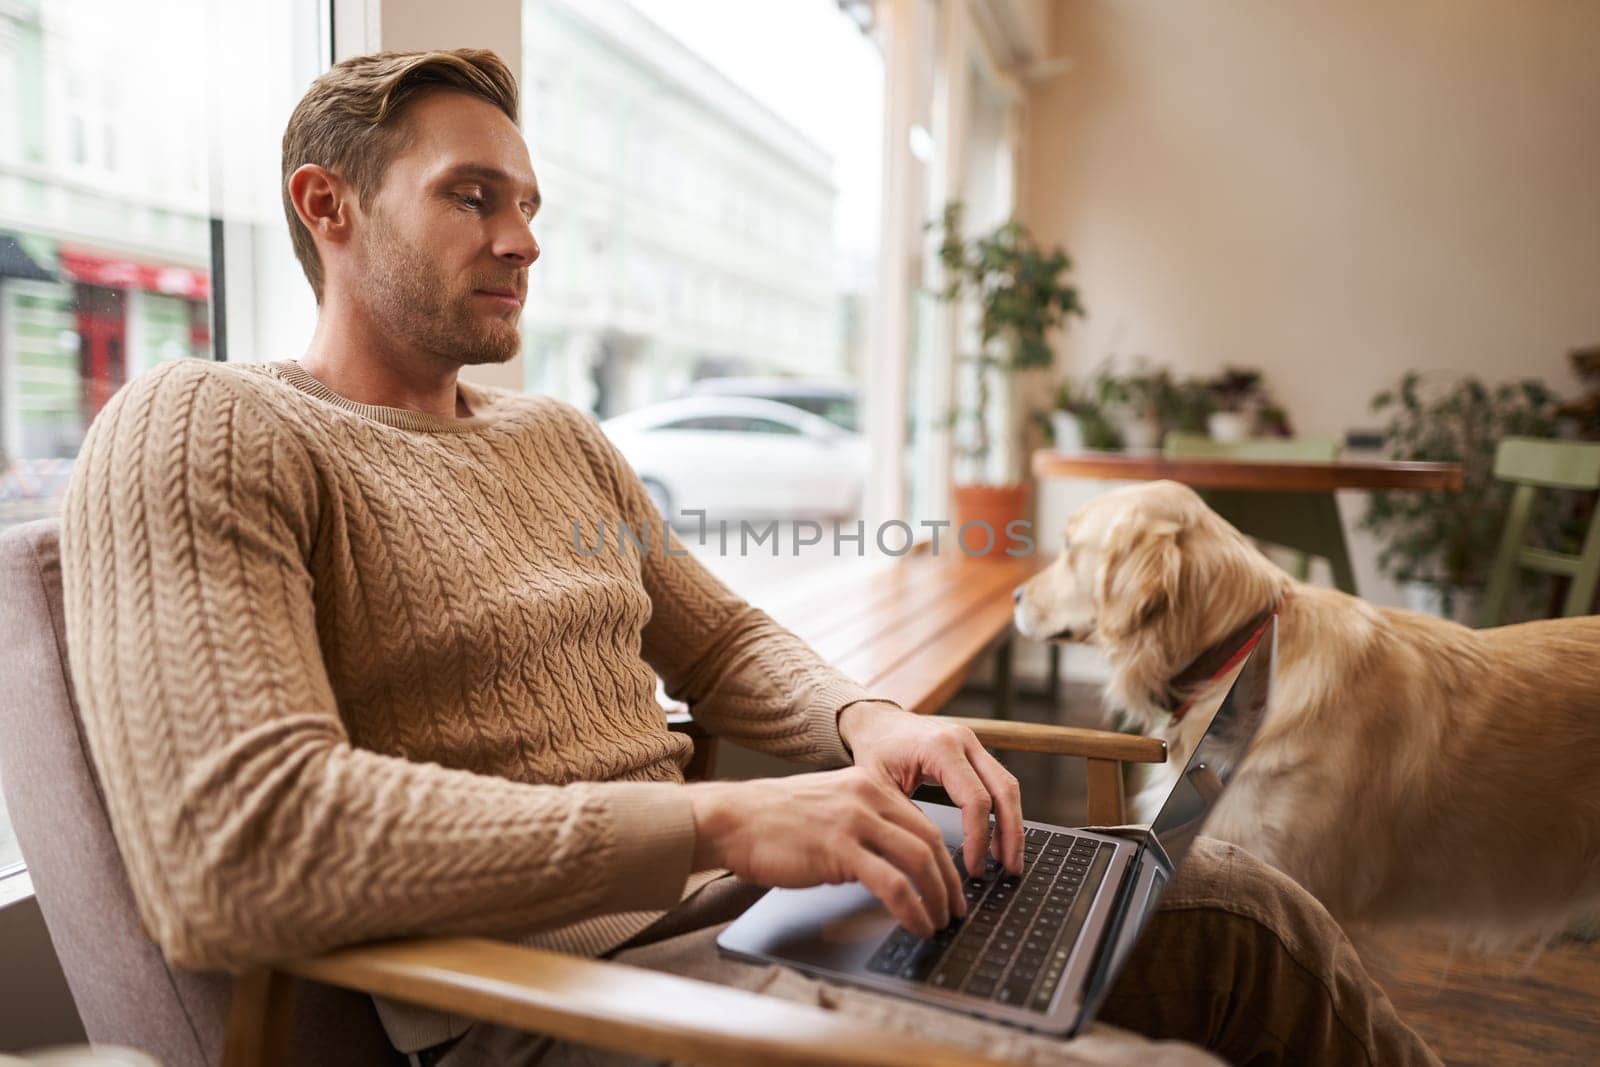 Handsome young man working in cafe with a dog, sitting on chair and using laptop, petting his golden retriever in animal-friendly co-working space.